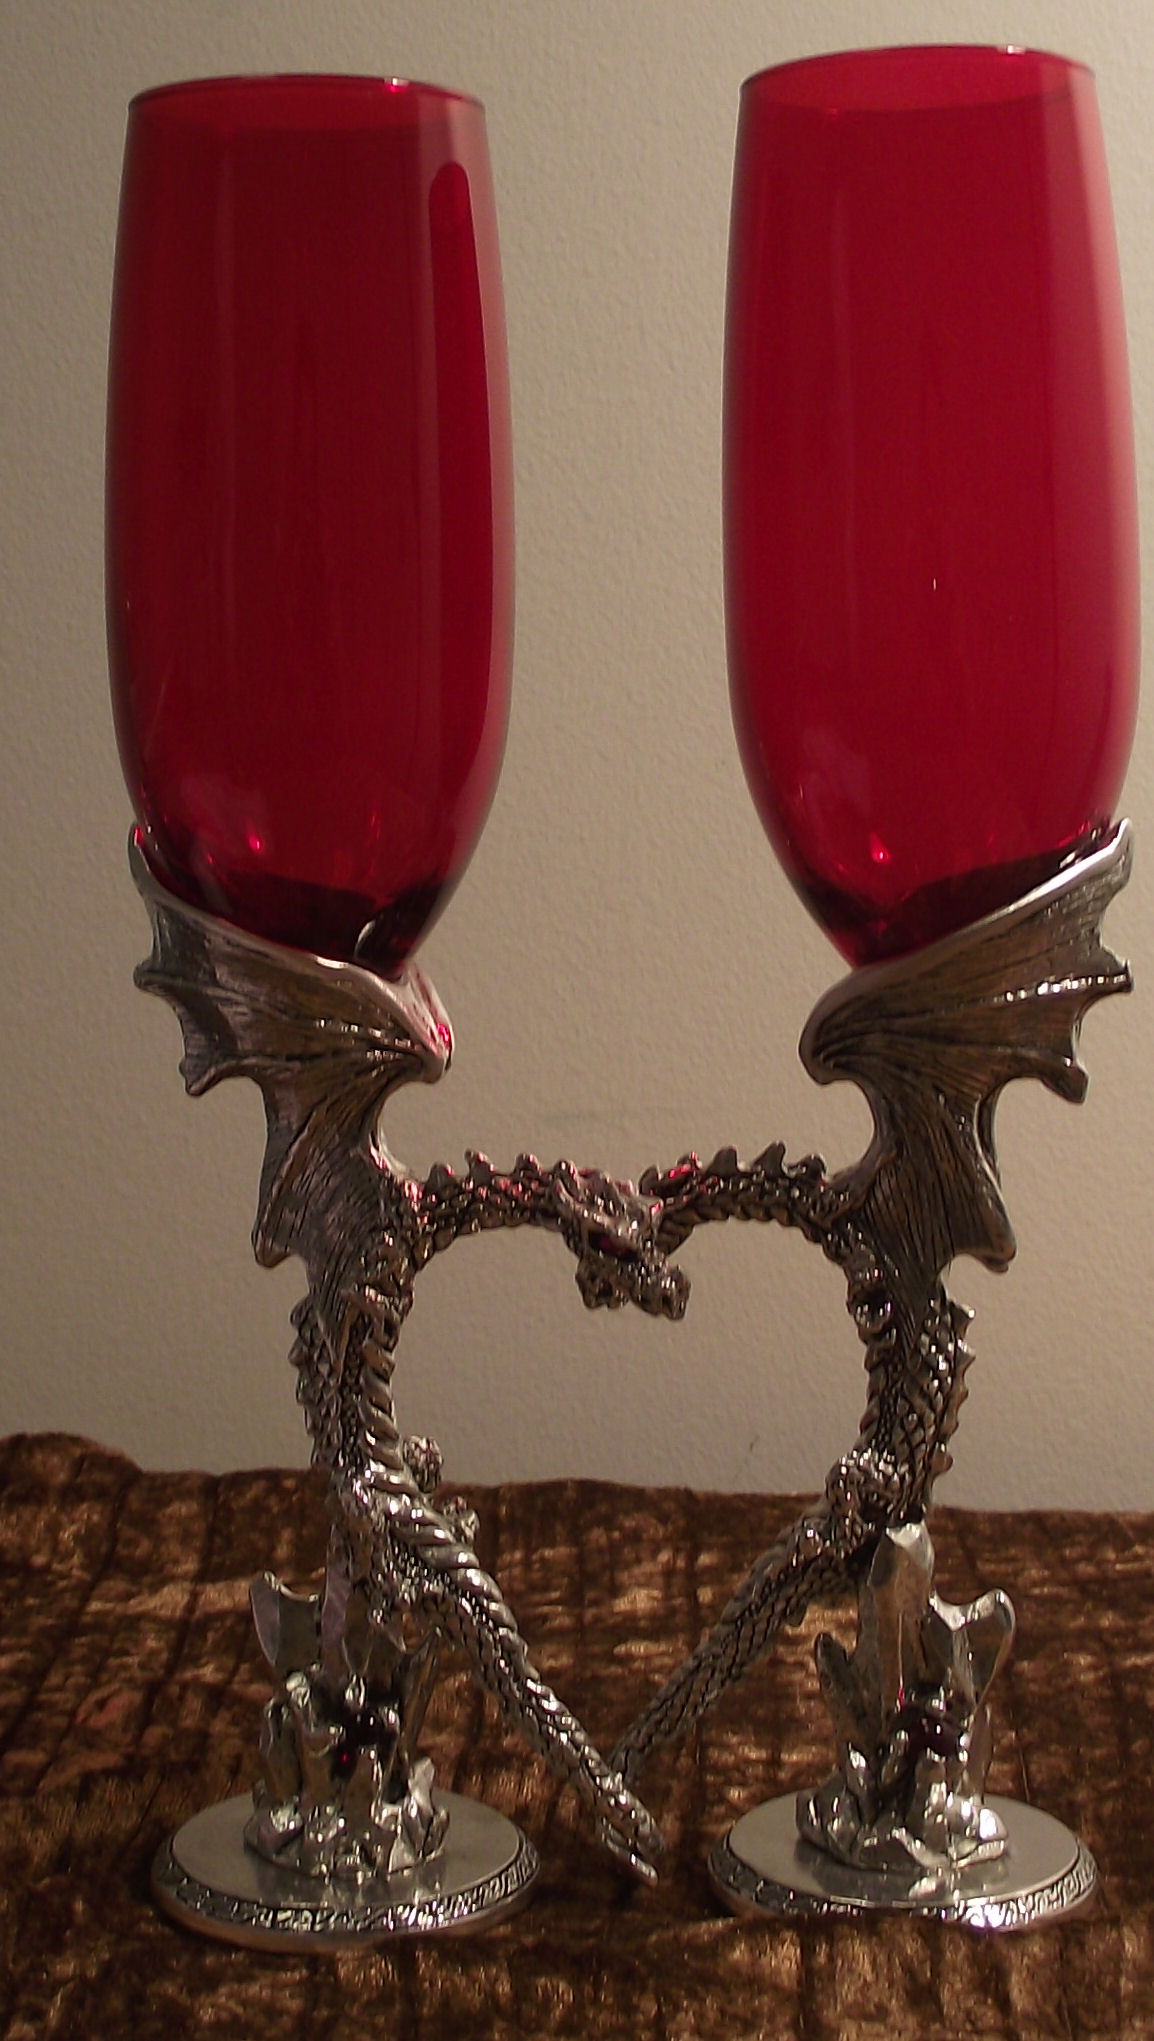 - Dragon Heart Glasses-Pewter Toasting Glasses #AT-DHG